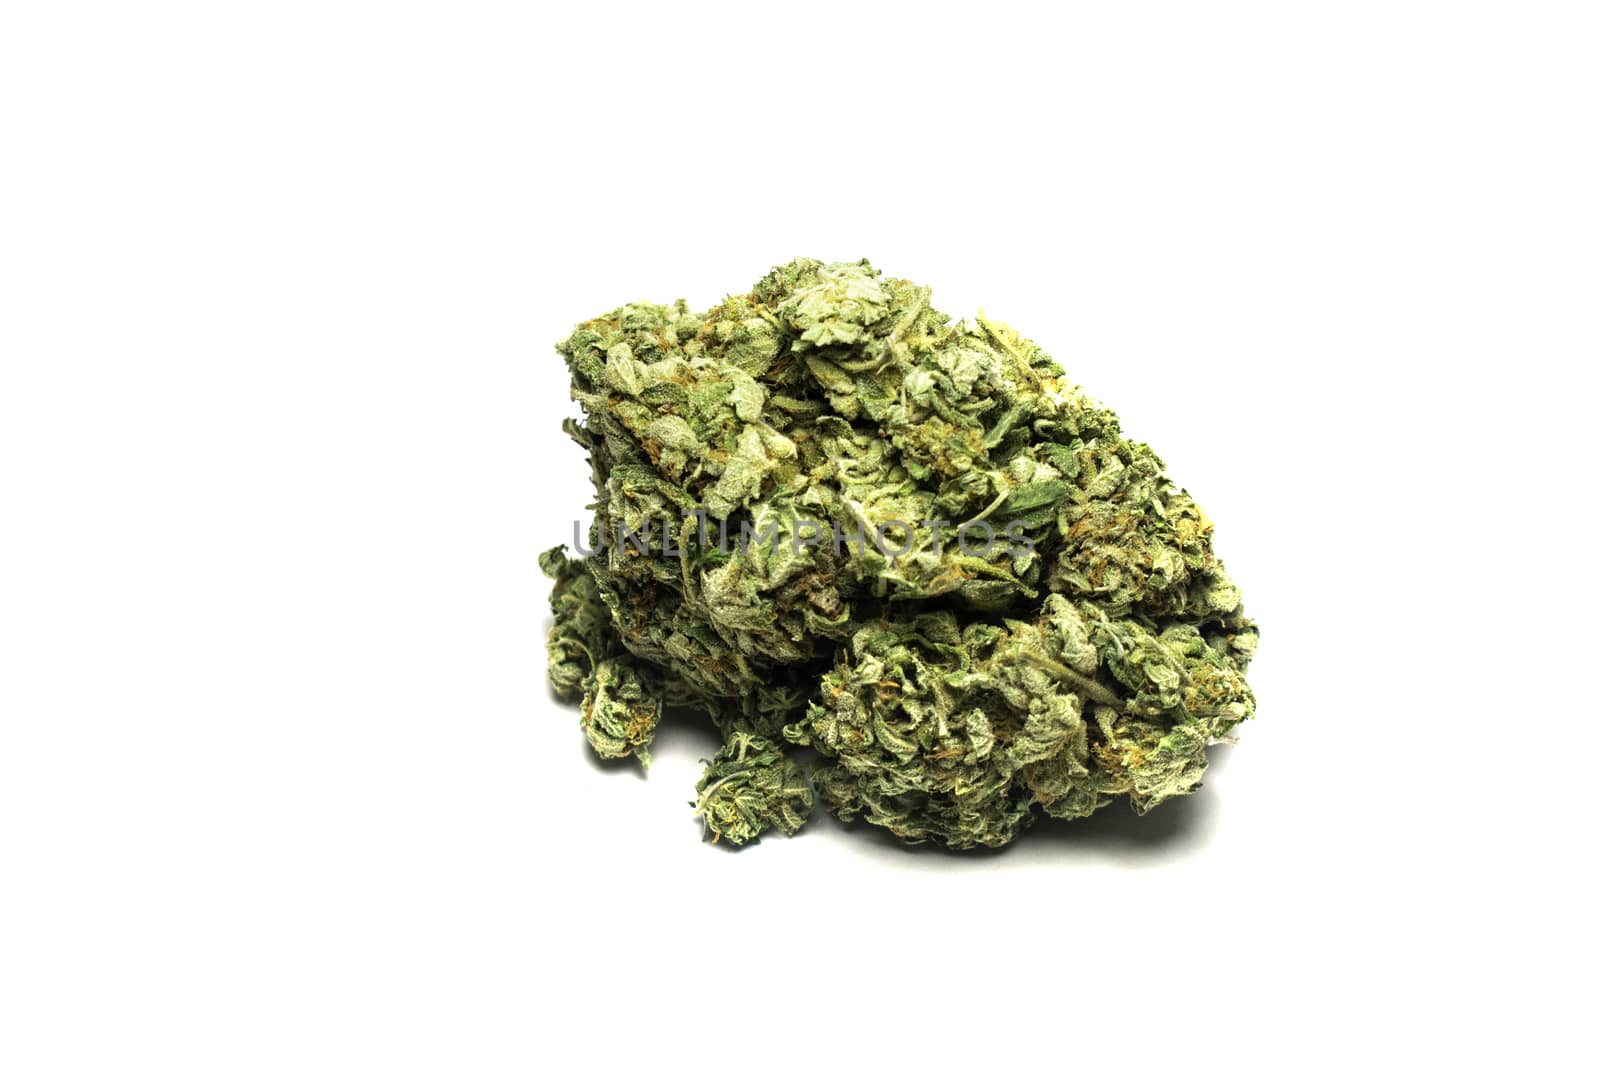 A Large Light Green and Orange Cannabis Nug on a Pure White Background